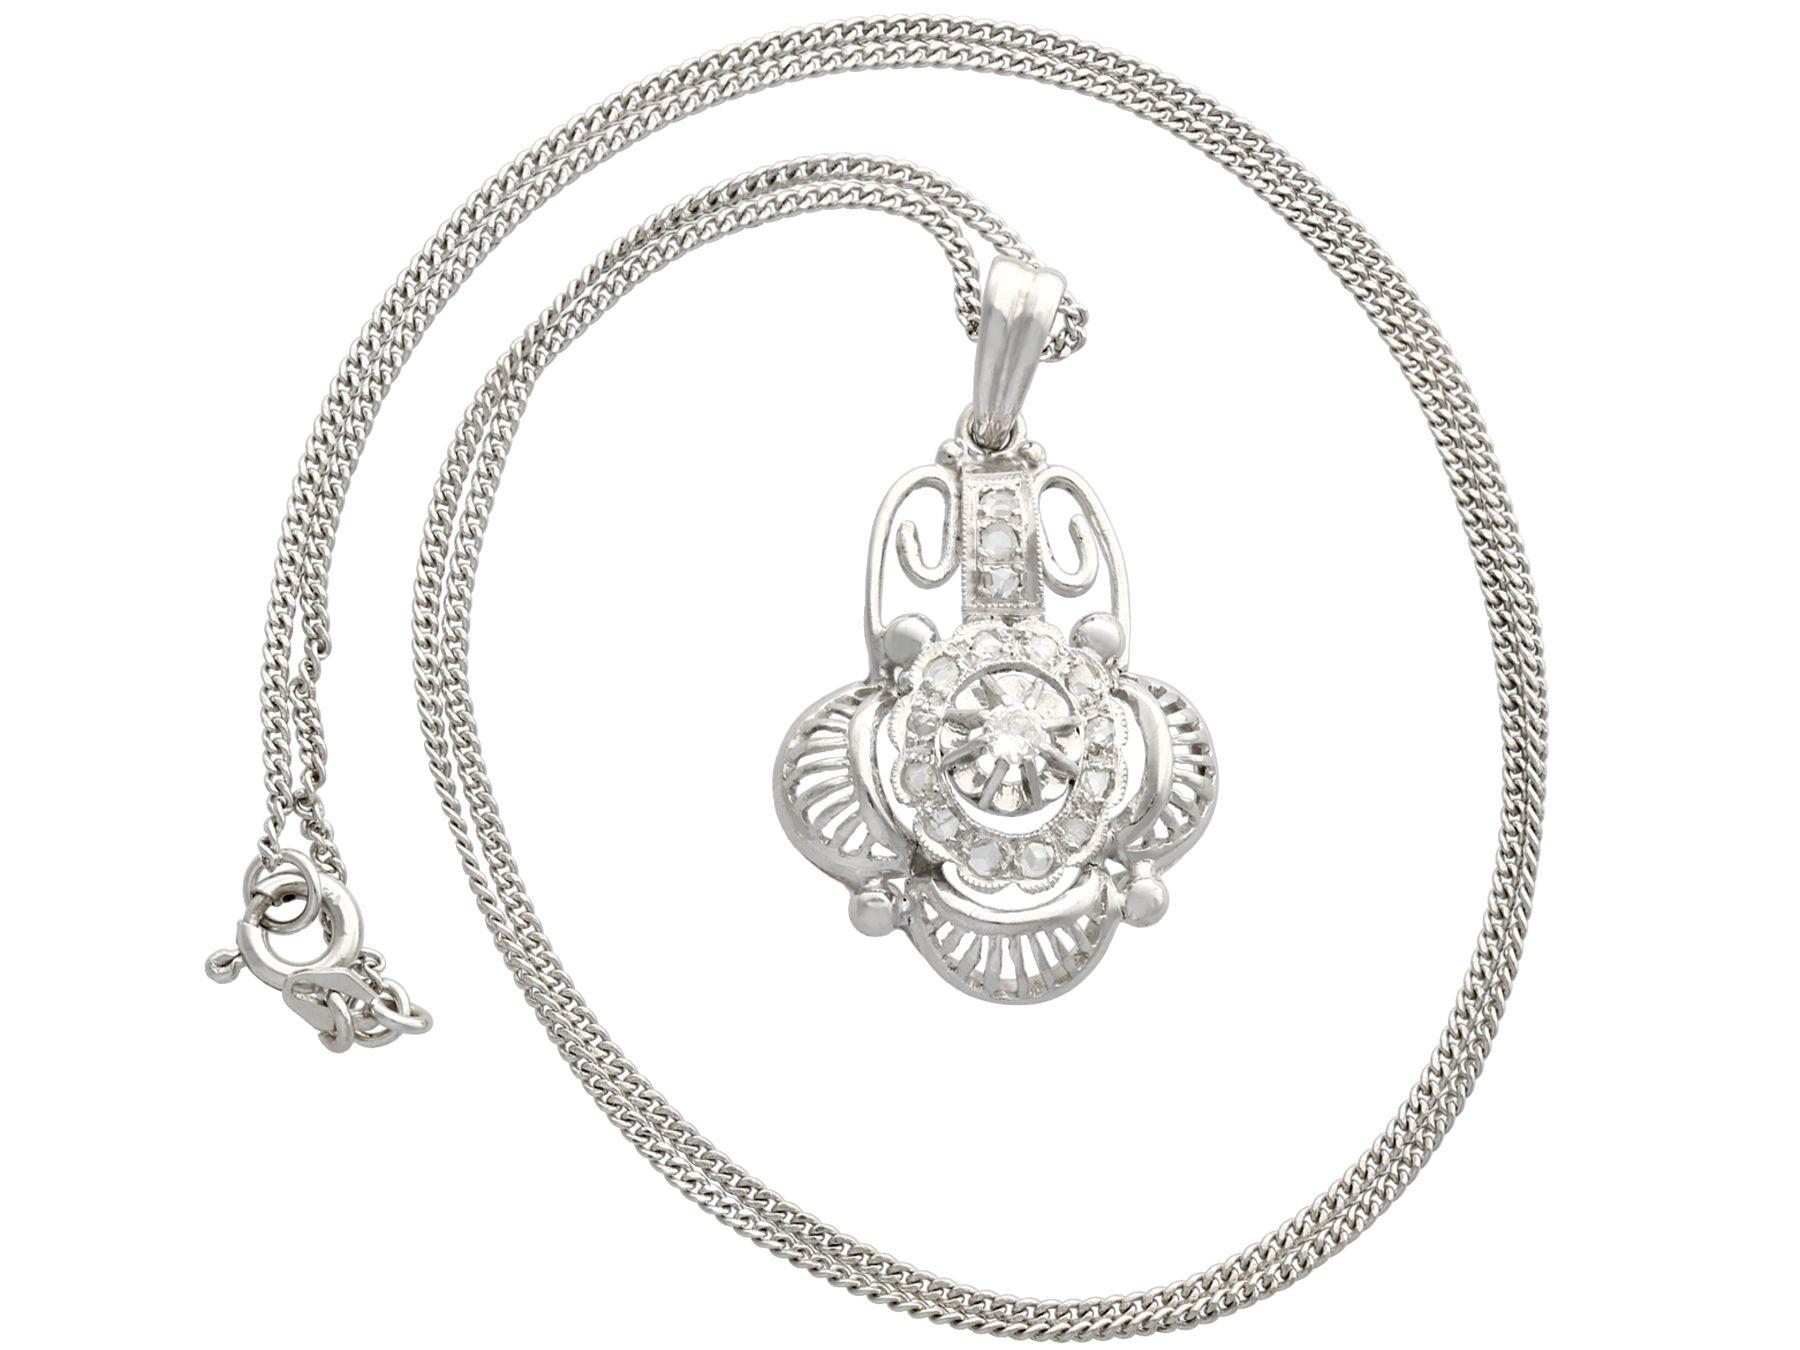 A fine and impressive antique Belgian 0.20 carat diamond and 18 karat white gold pendant; part of our diverse antique jewelry and estate jewelry collections.

This fine and impressive has been crafted in 18k white gold.

The pierced decorated